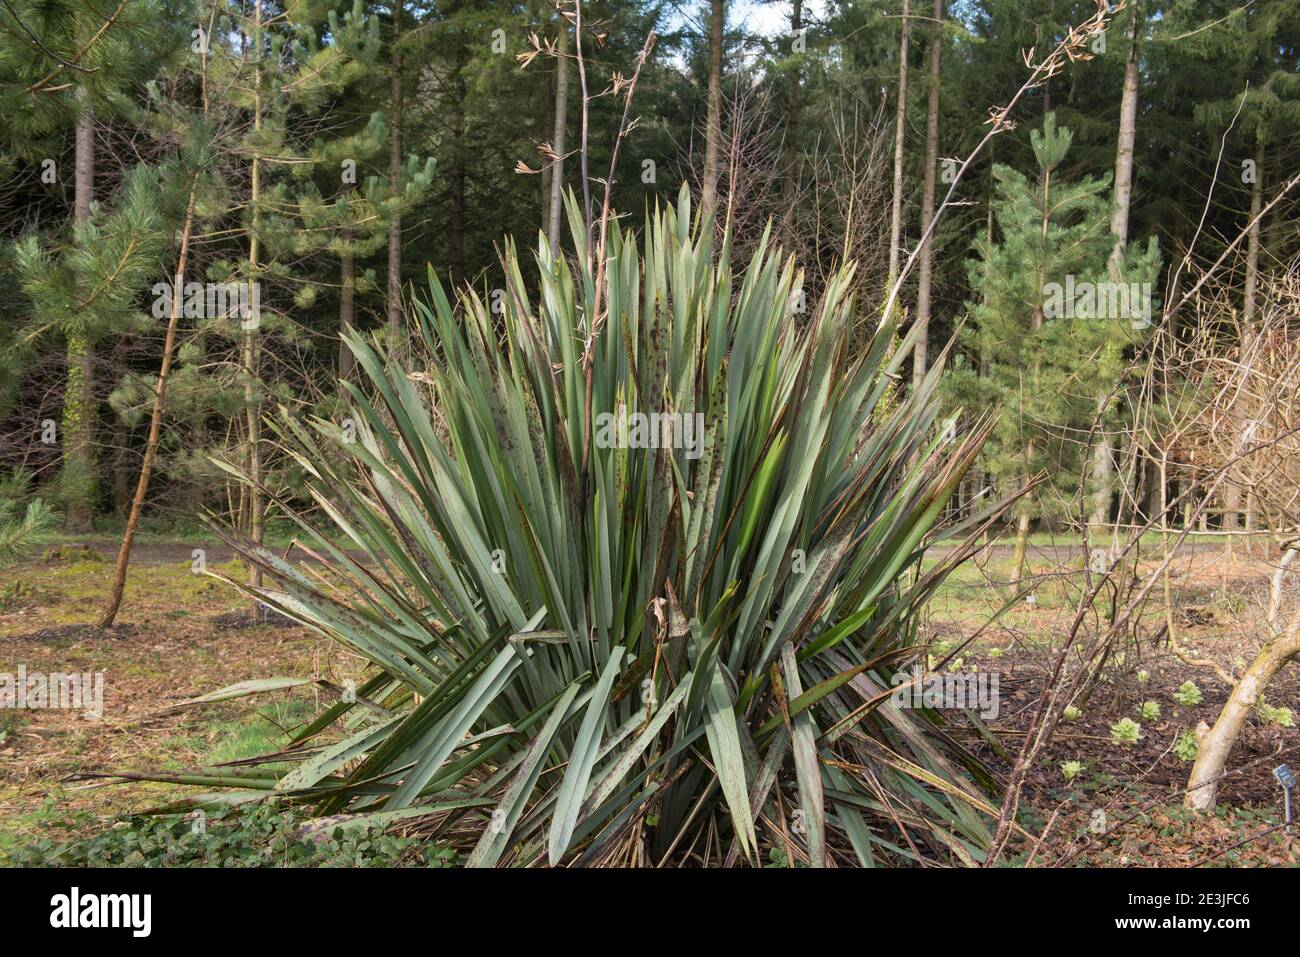 Winter Foliage of an Evergreen New Zealand Flax or Common Flax Lily (Phormium tenax) with Douglas fir Trees in the Background in a Woodland Garden Stock Photo